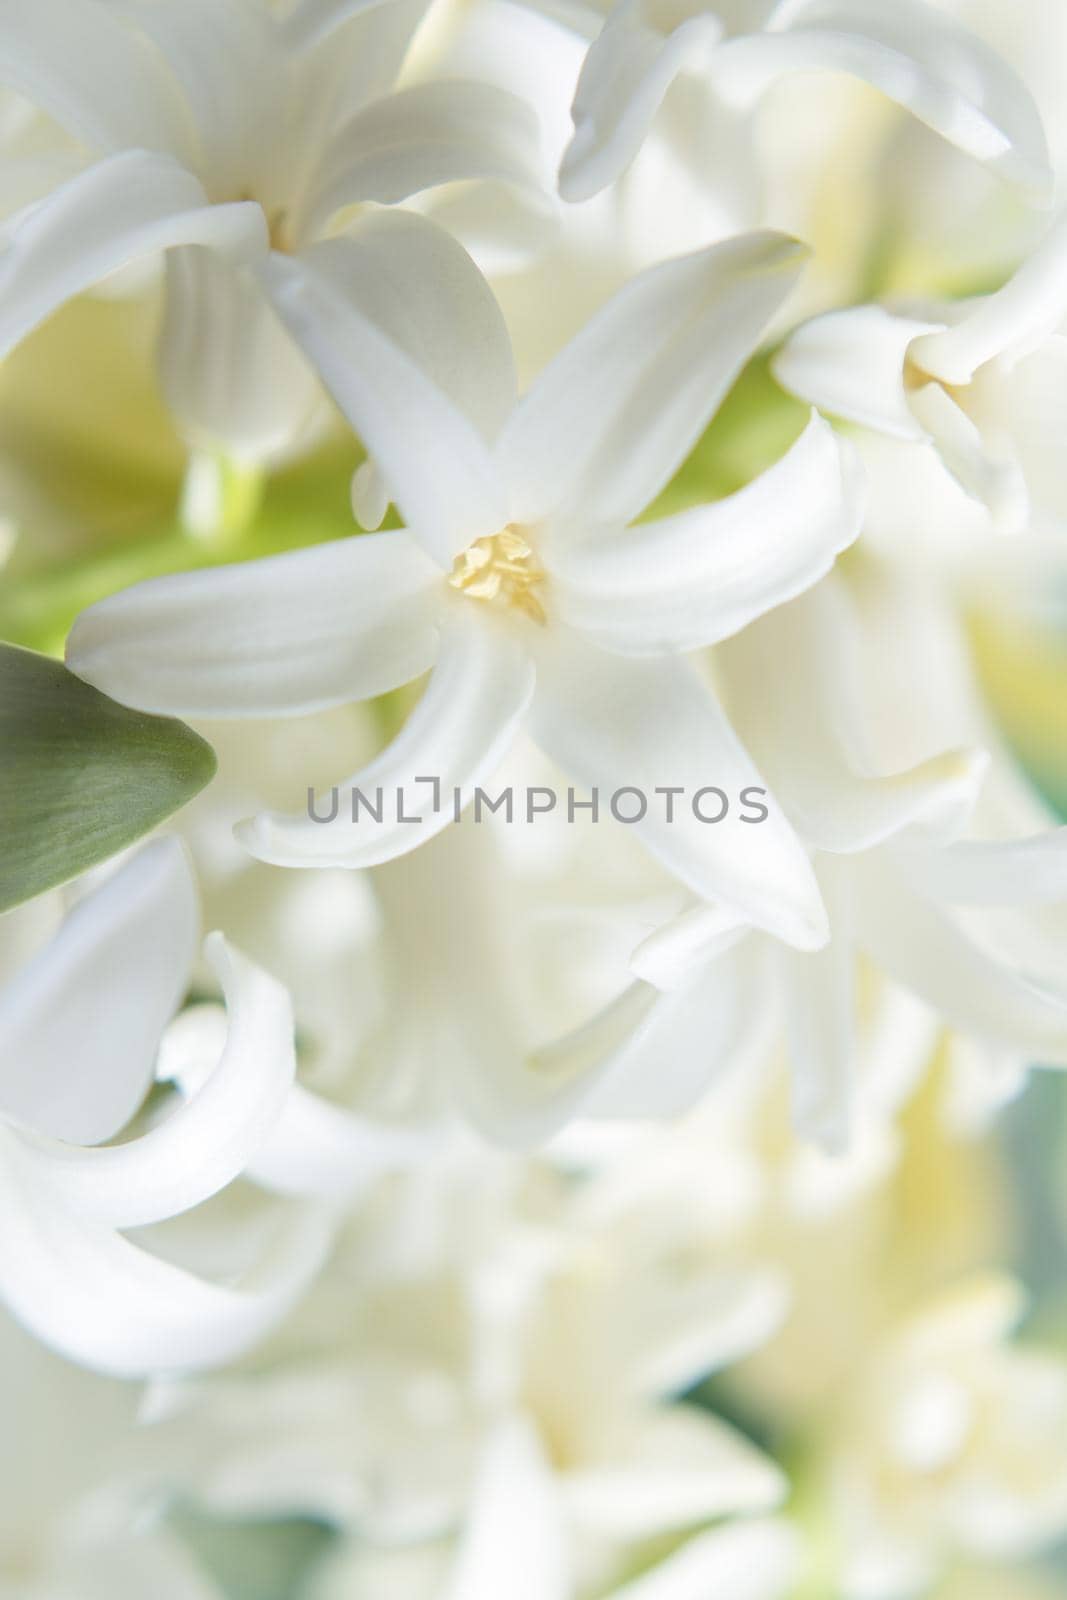 White hyacinth in full spring bloom. No people